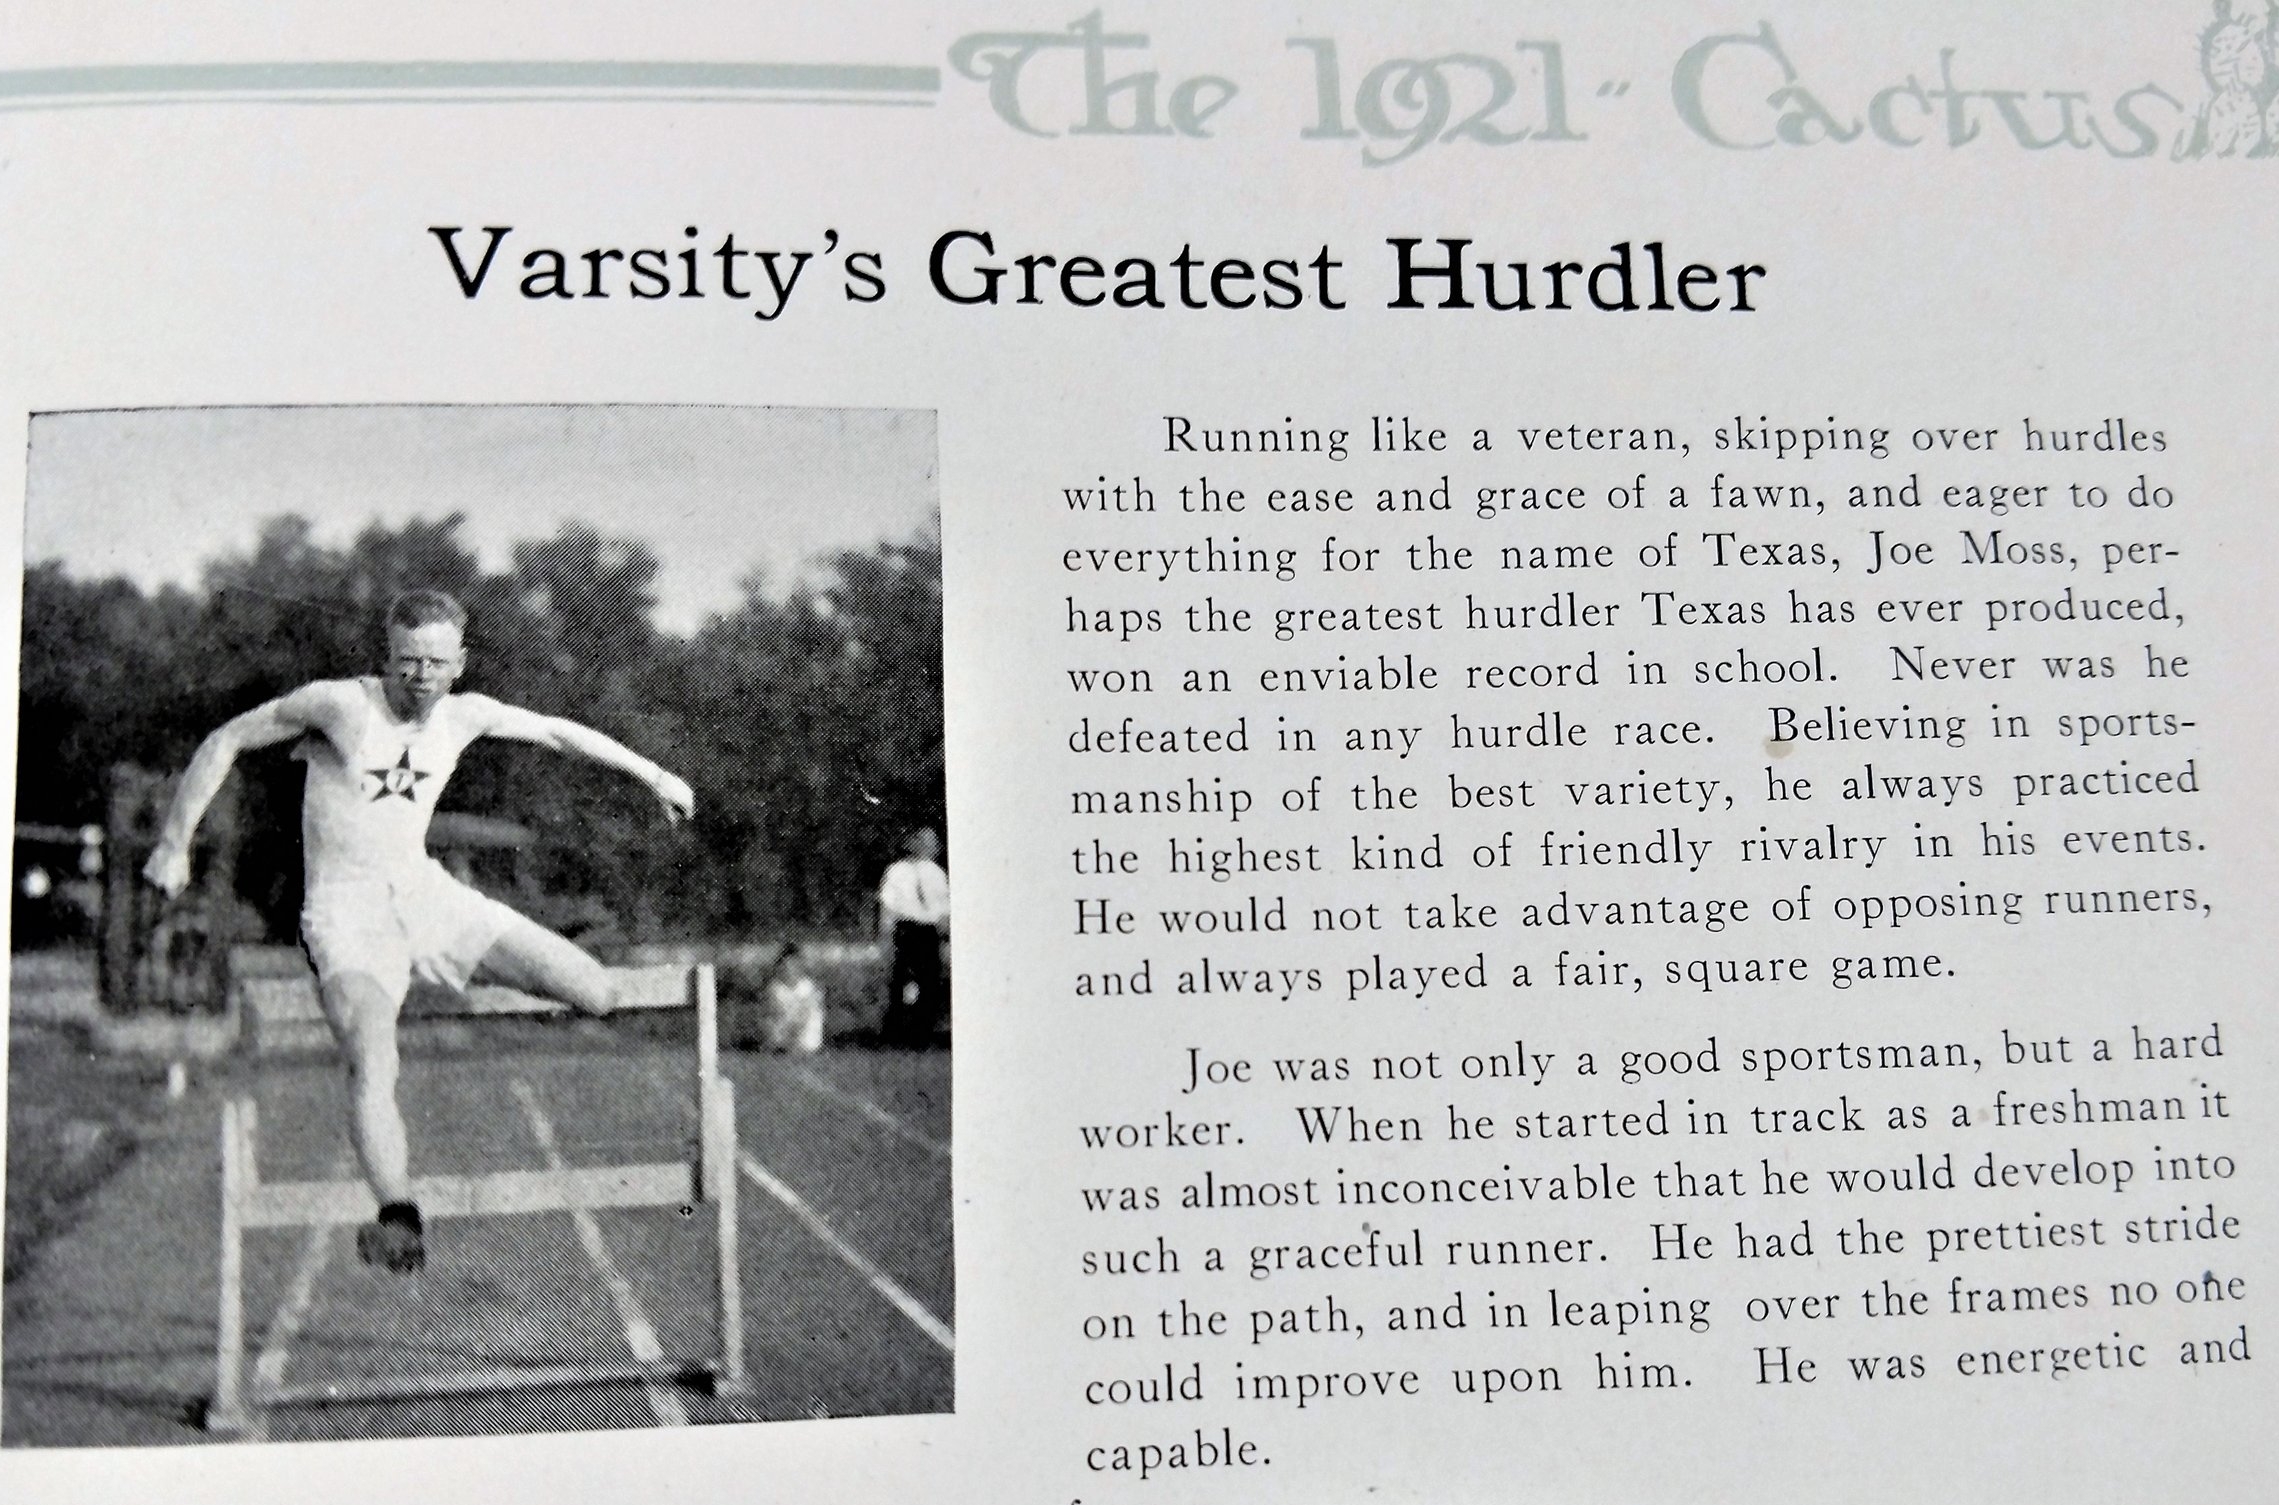 Joe Moss holds a record that will never be broken only tied.  He was never defeated in the hurdles.